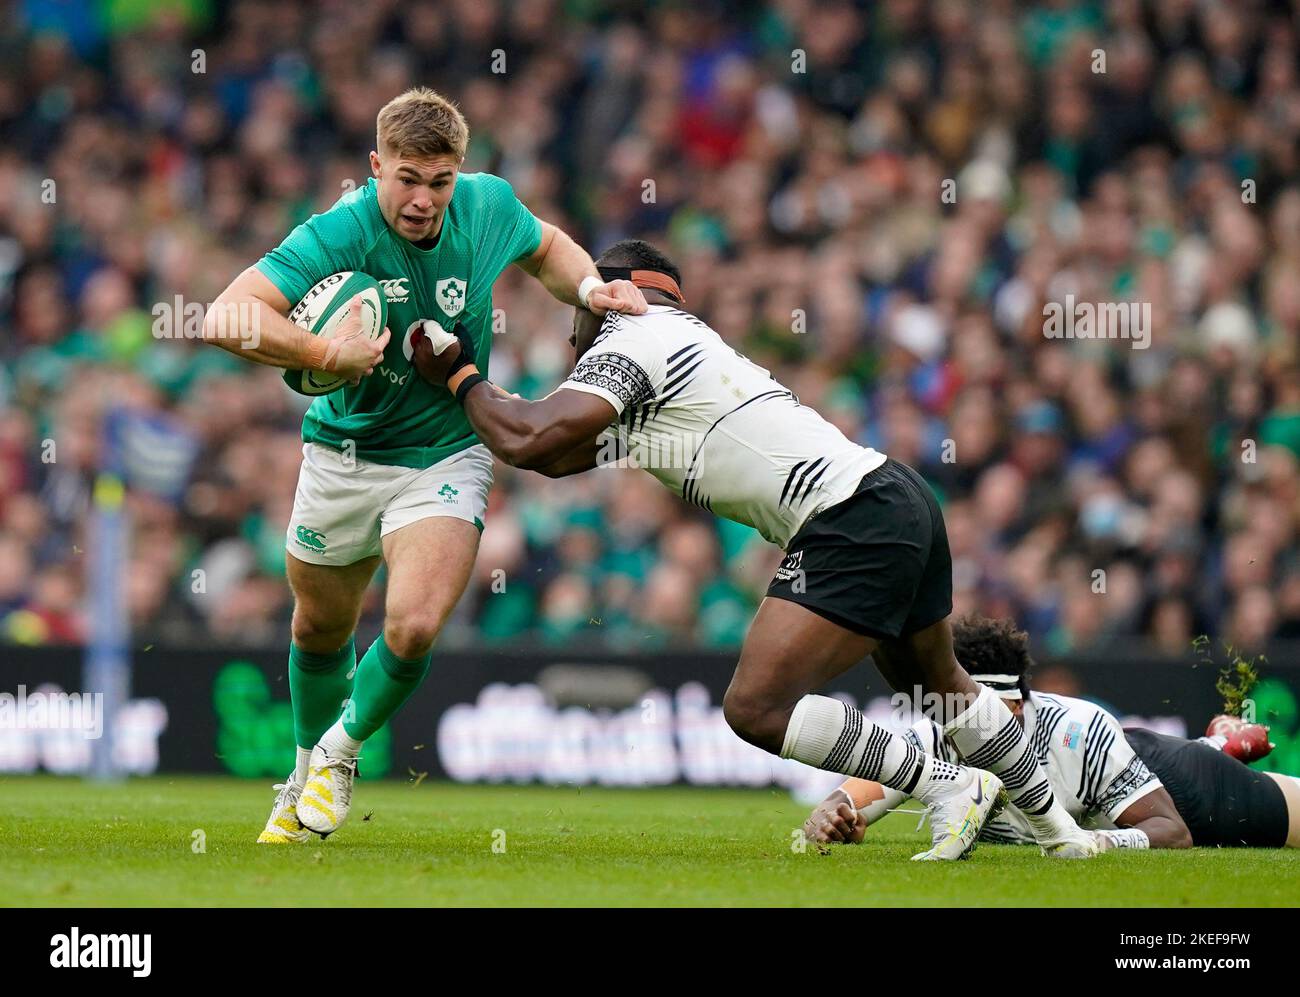 Ireland's Jack Crowley (left) is tackled by Fiji's Levani Botia during the Autumn International match at the Aviva Stadium in Dublin, Ireland. Picture date: Saturday November 12, 2022. Stock Photo